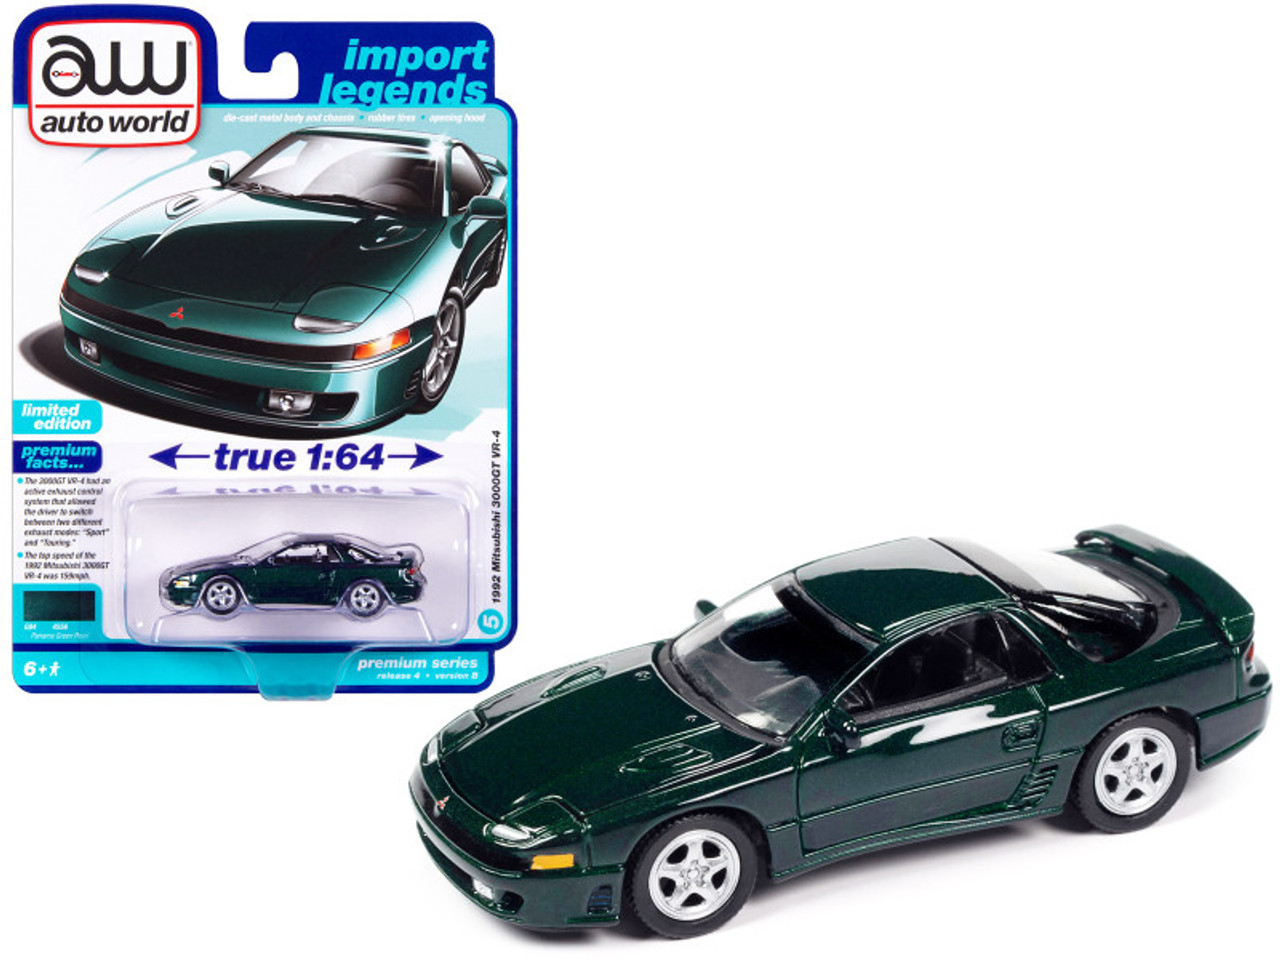 1992 Mitsubishi 3000GT VR-4 Panama Green Metallic "Import Legends" Limited Edition 1/64 Diecast Model Car by Auto World